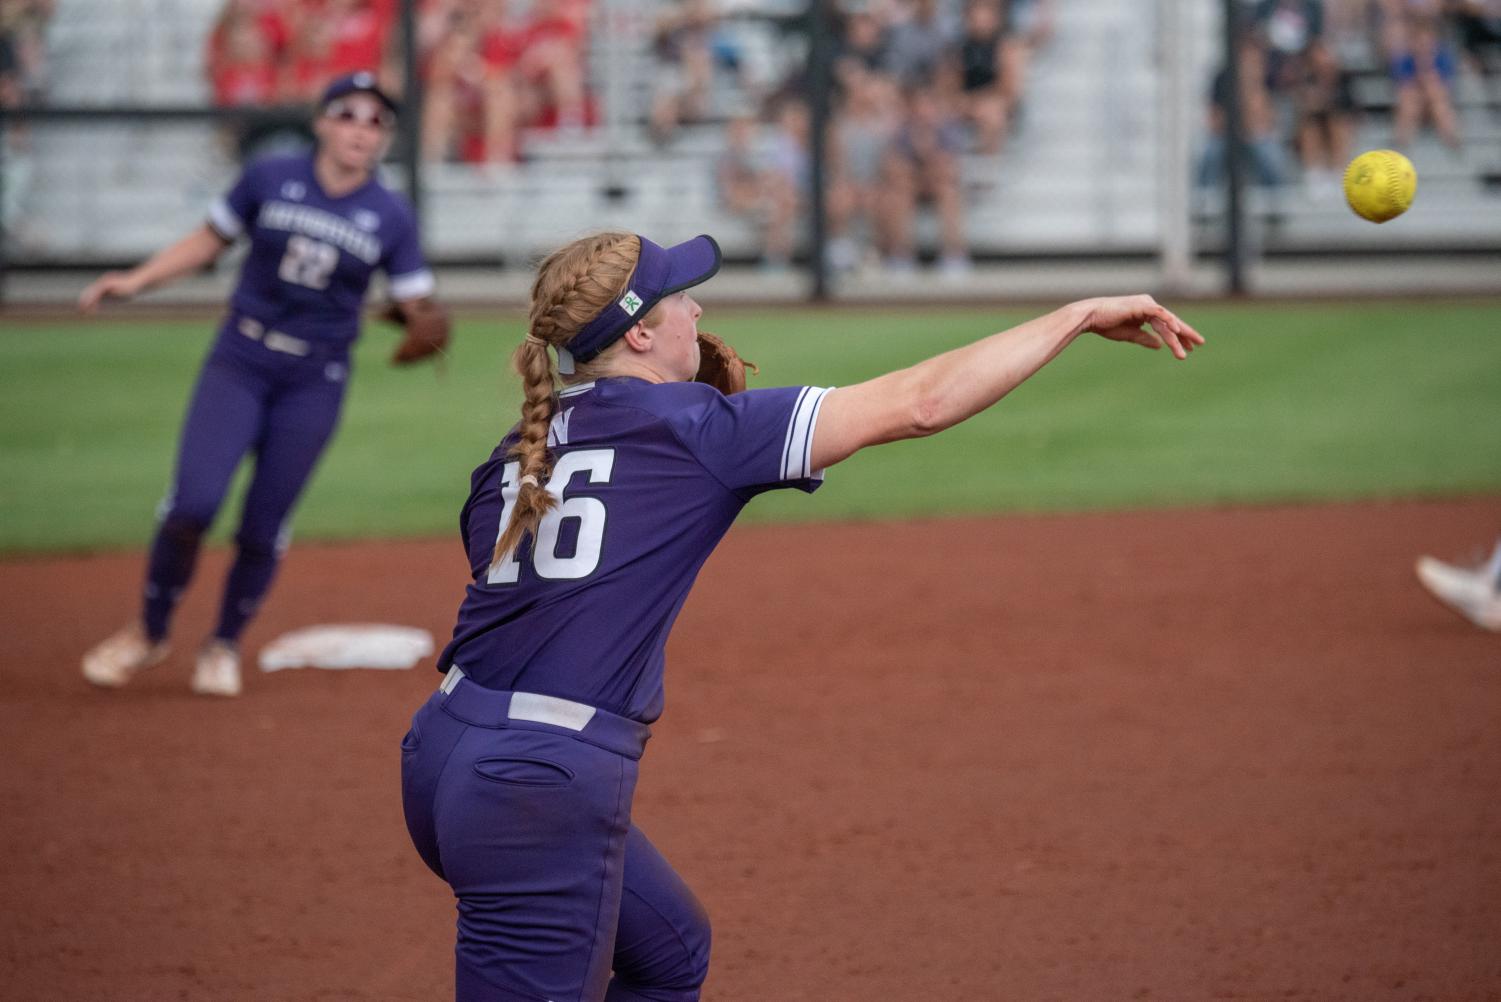  A player wearing a purple jersey on third base throws a softball towards first base.